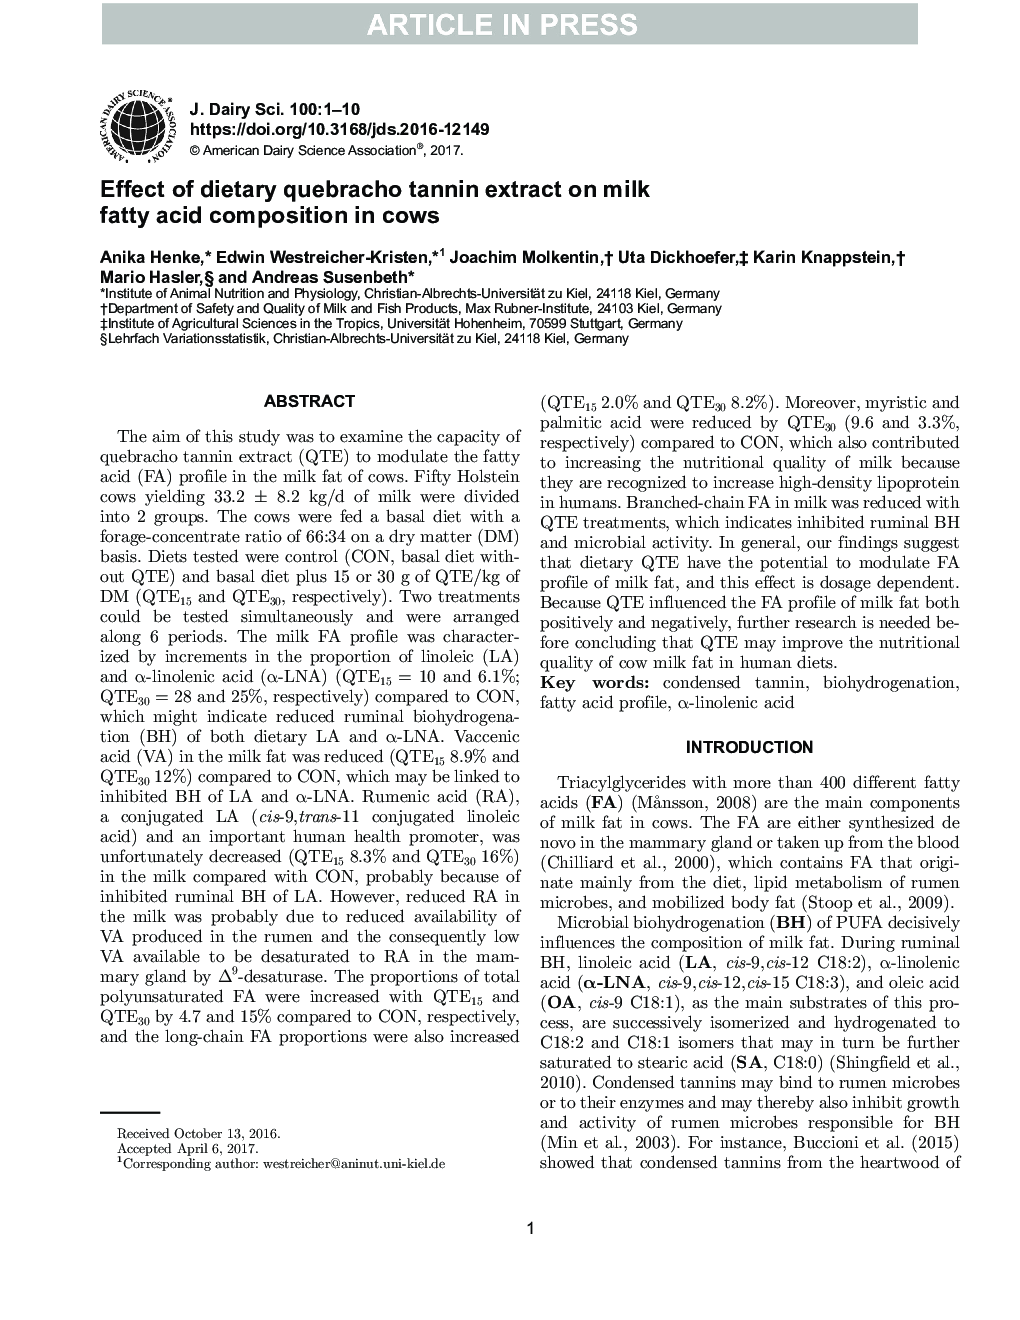 Effect of dietary quebracho tannin extract on milk fatty acid composition in cows